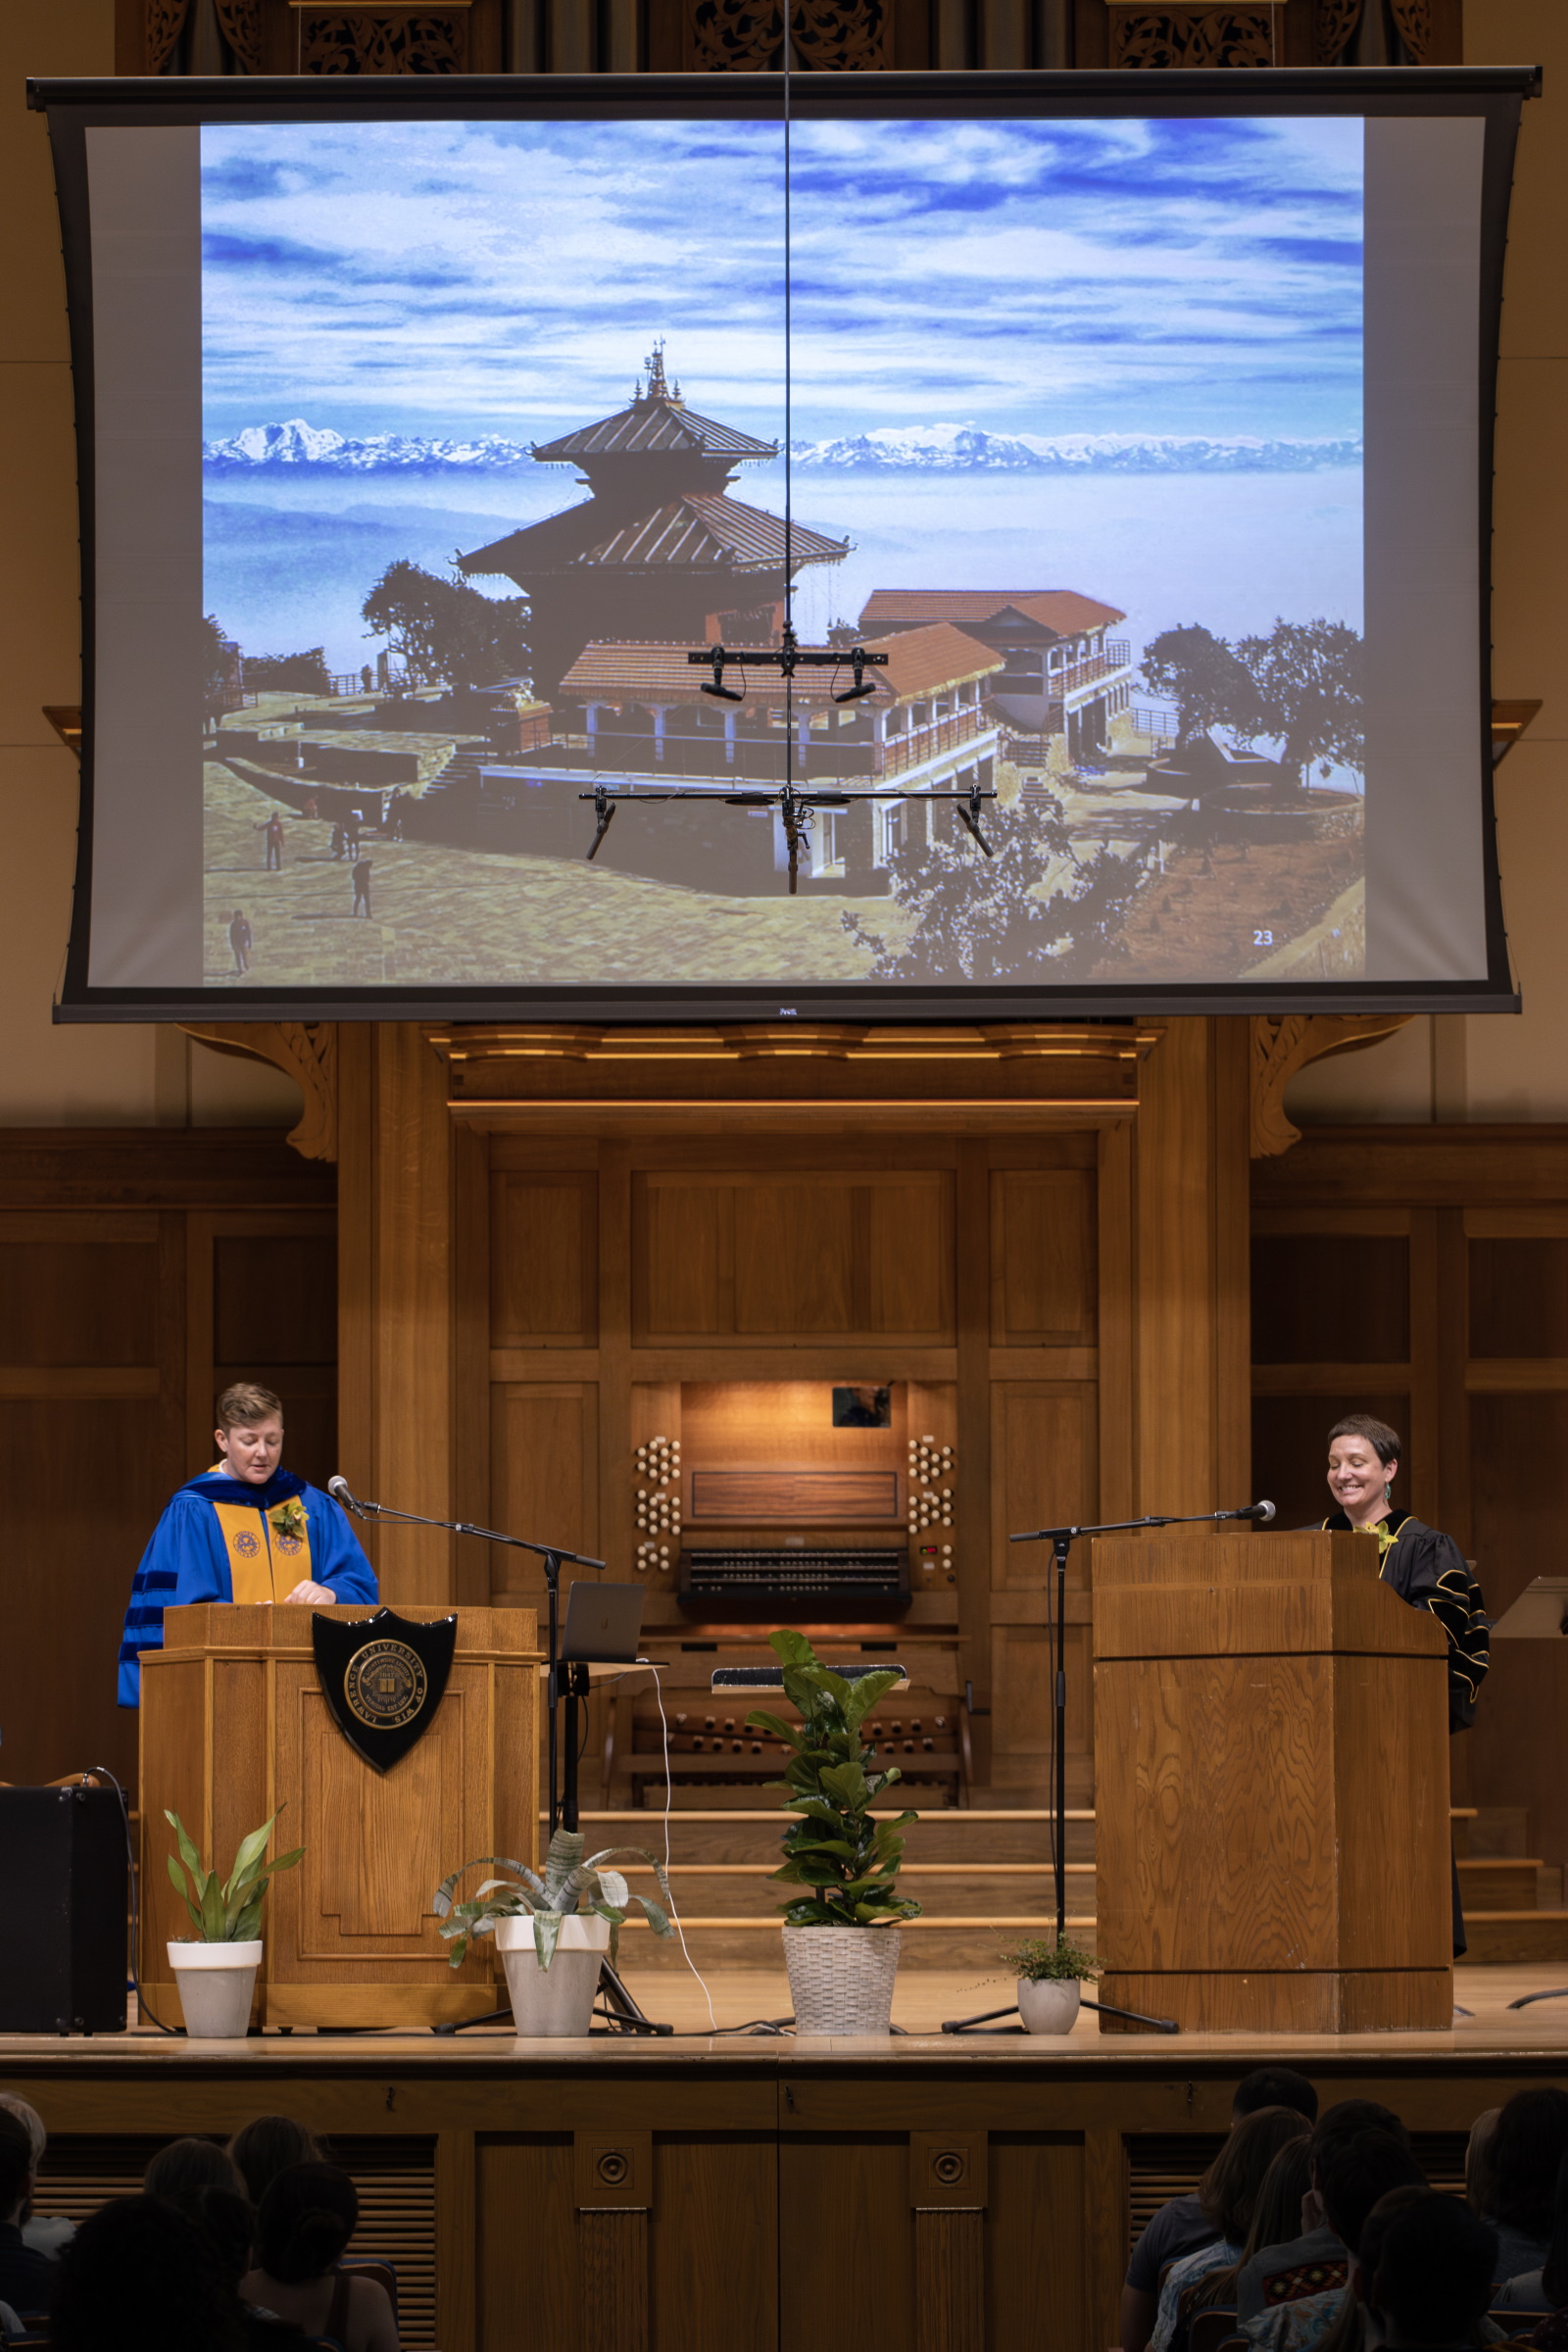 Constance Kassor and Madera Allan showed photos from Spain and Nepal on a big screen during their presentation on pilgrimages.